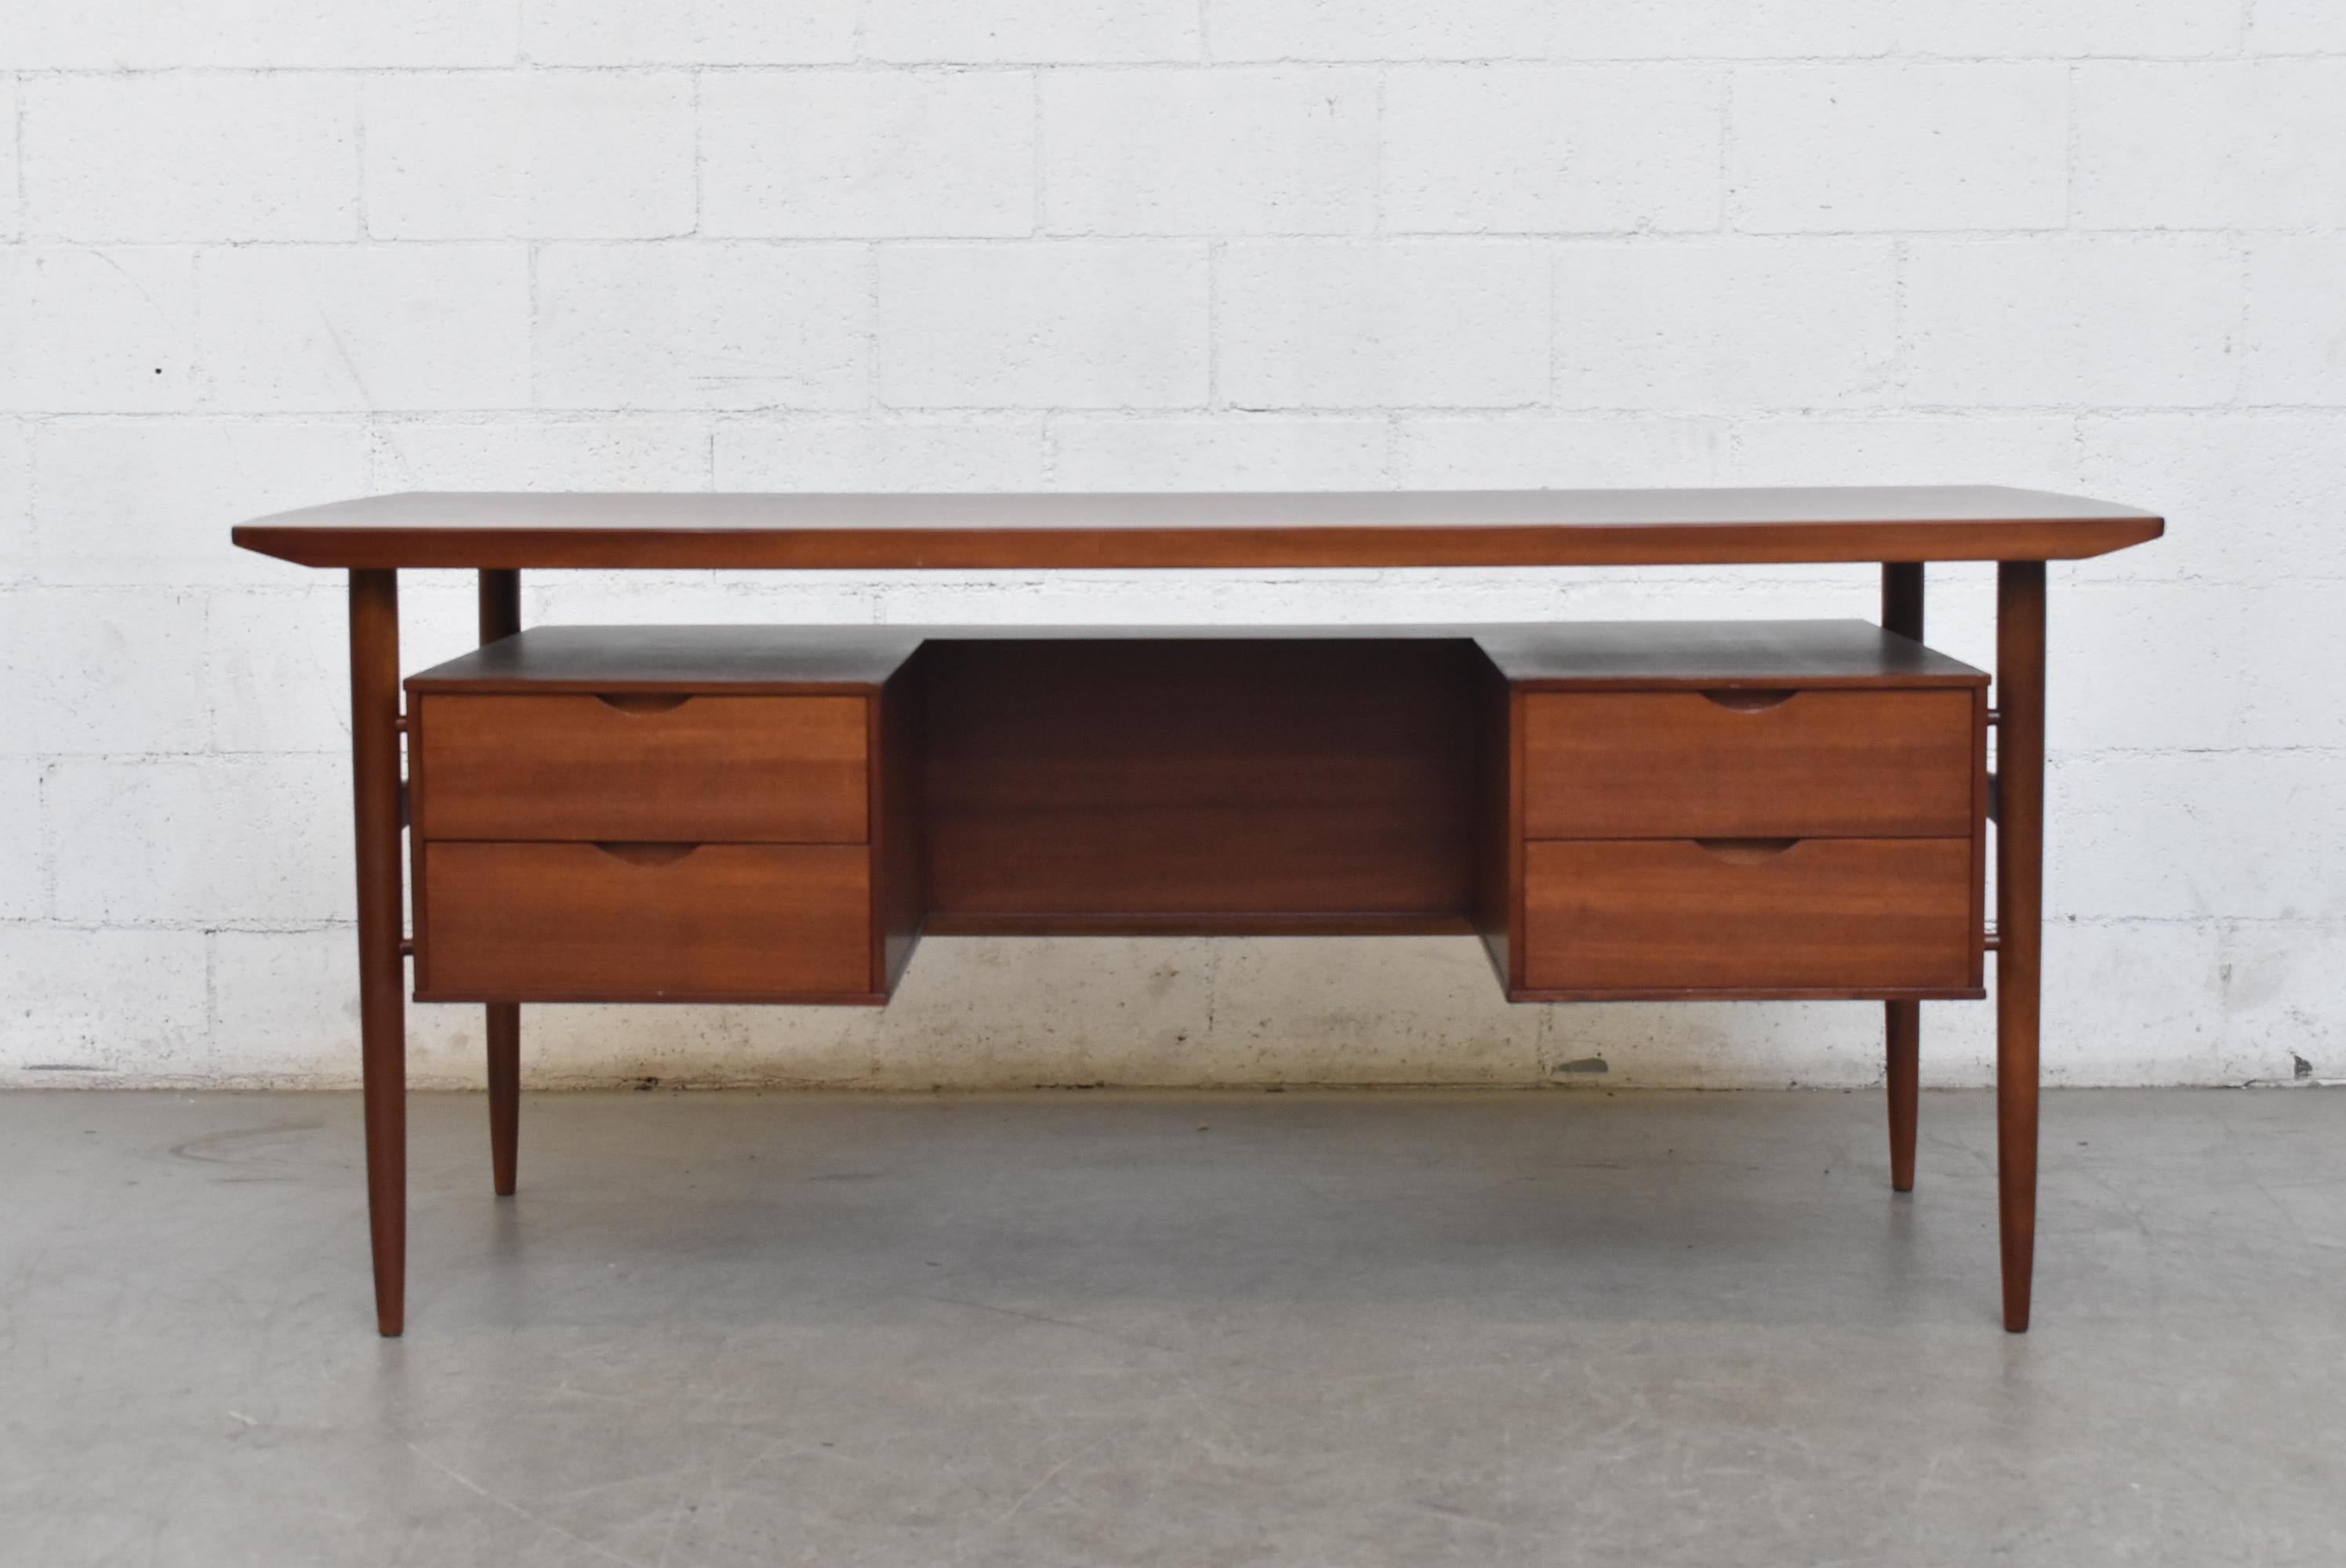 William Watting style midcentury teak desk, lightly refinished with floating top with back book case as privacy screen tapered legs. Good original condition with some wear consistent with its age and usage.